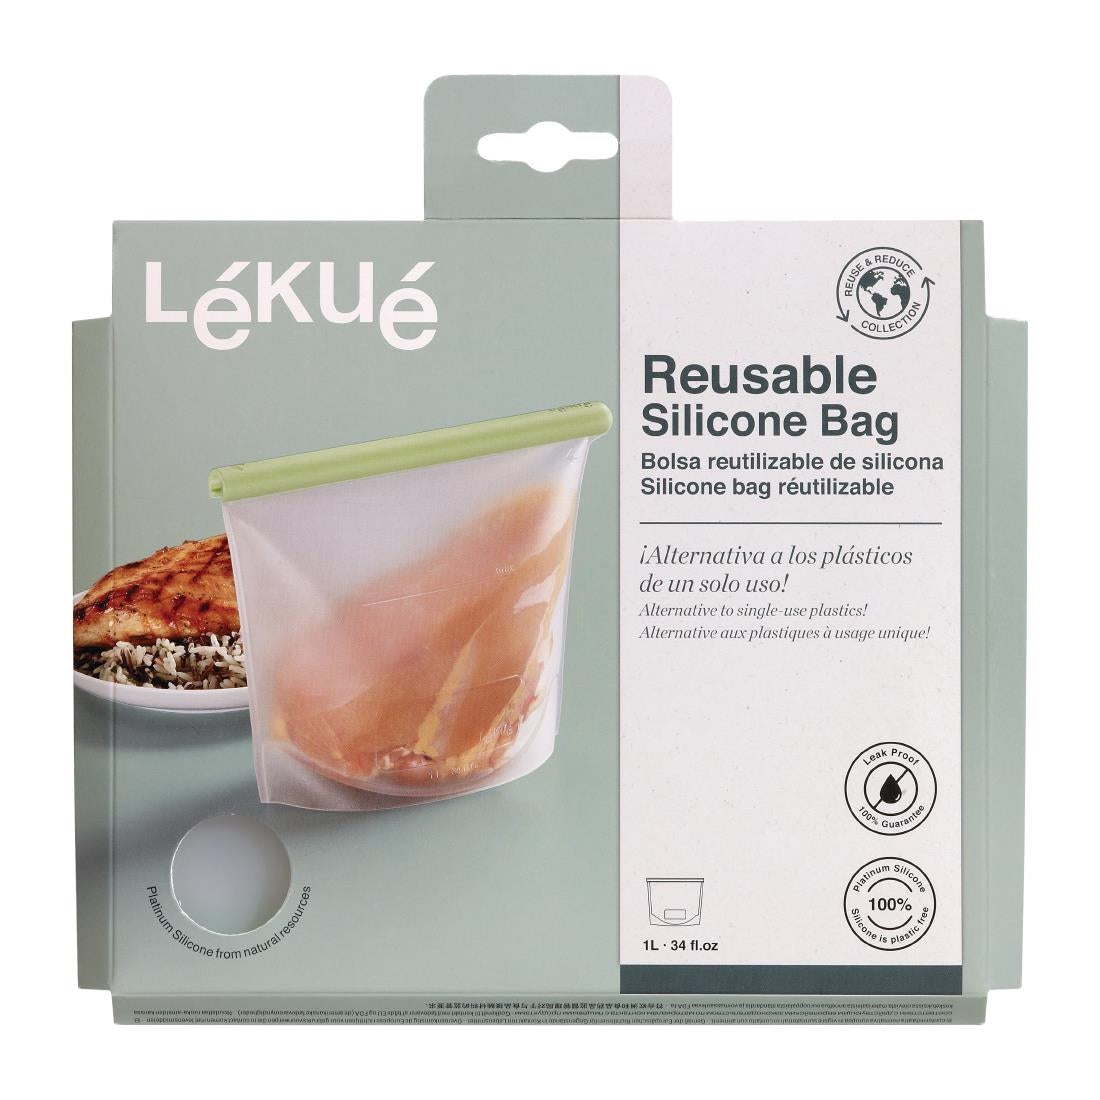 FS289 Lekue Reusable Silicone Food Storage Bag 1 Ltr JD Catering Equipment Solutions Ltd